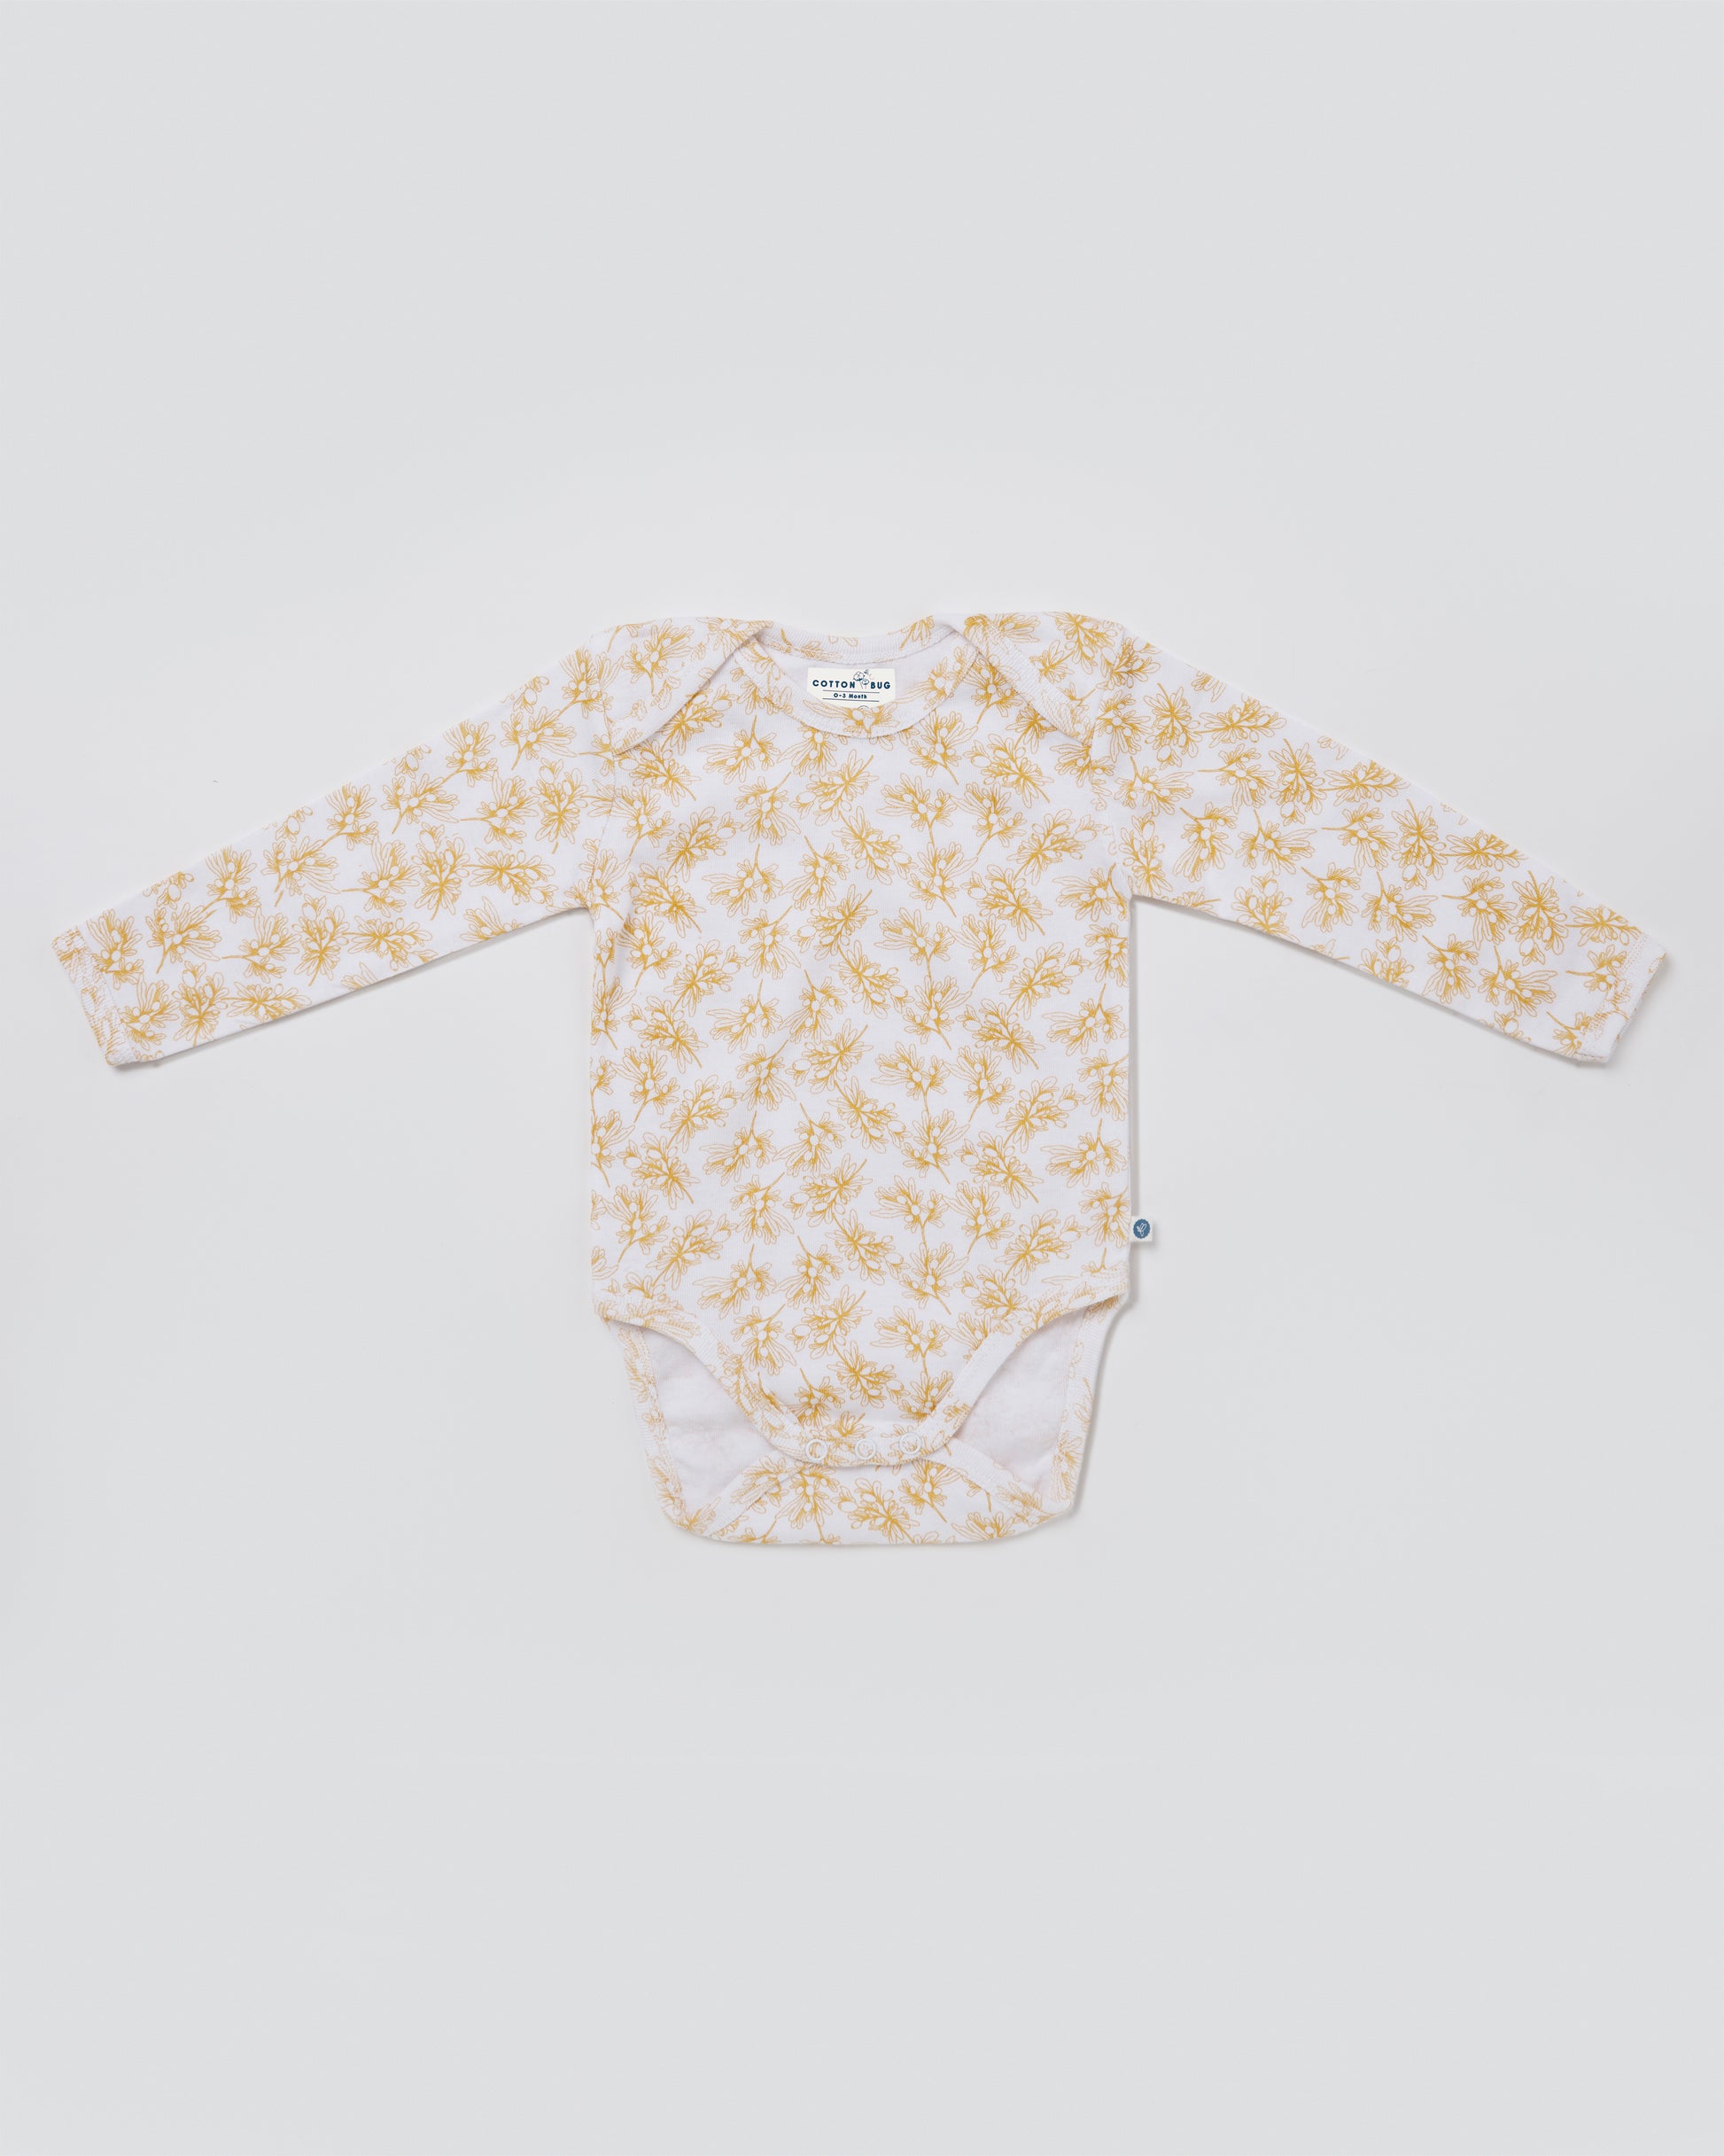 Cotton Baby Printed Bodysuit, Half Sleeves, Size: Small at Rs 52